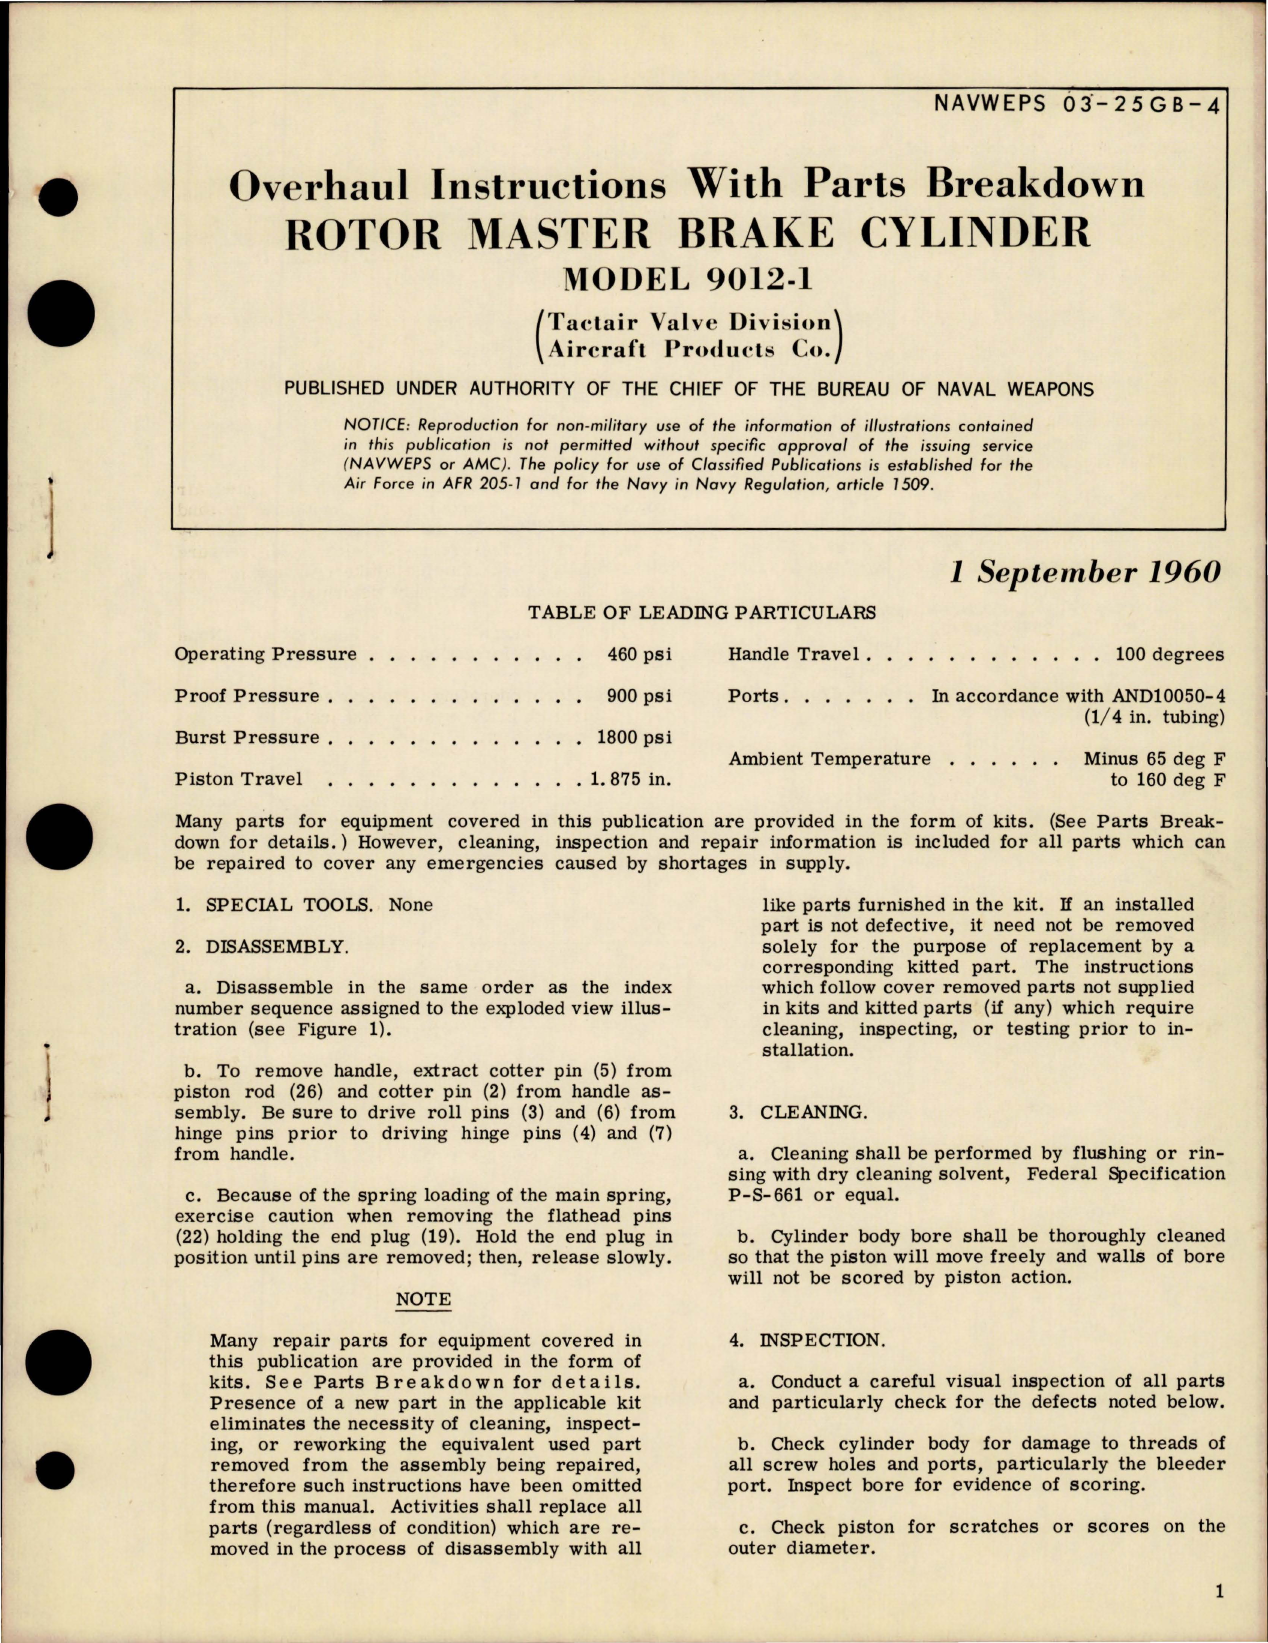 Sample page 1 from AirCorps Library document: Overhaul Instructions with Parts Breakdown for Rotor Master Brake Cylinder - Model 9012-1